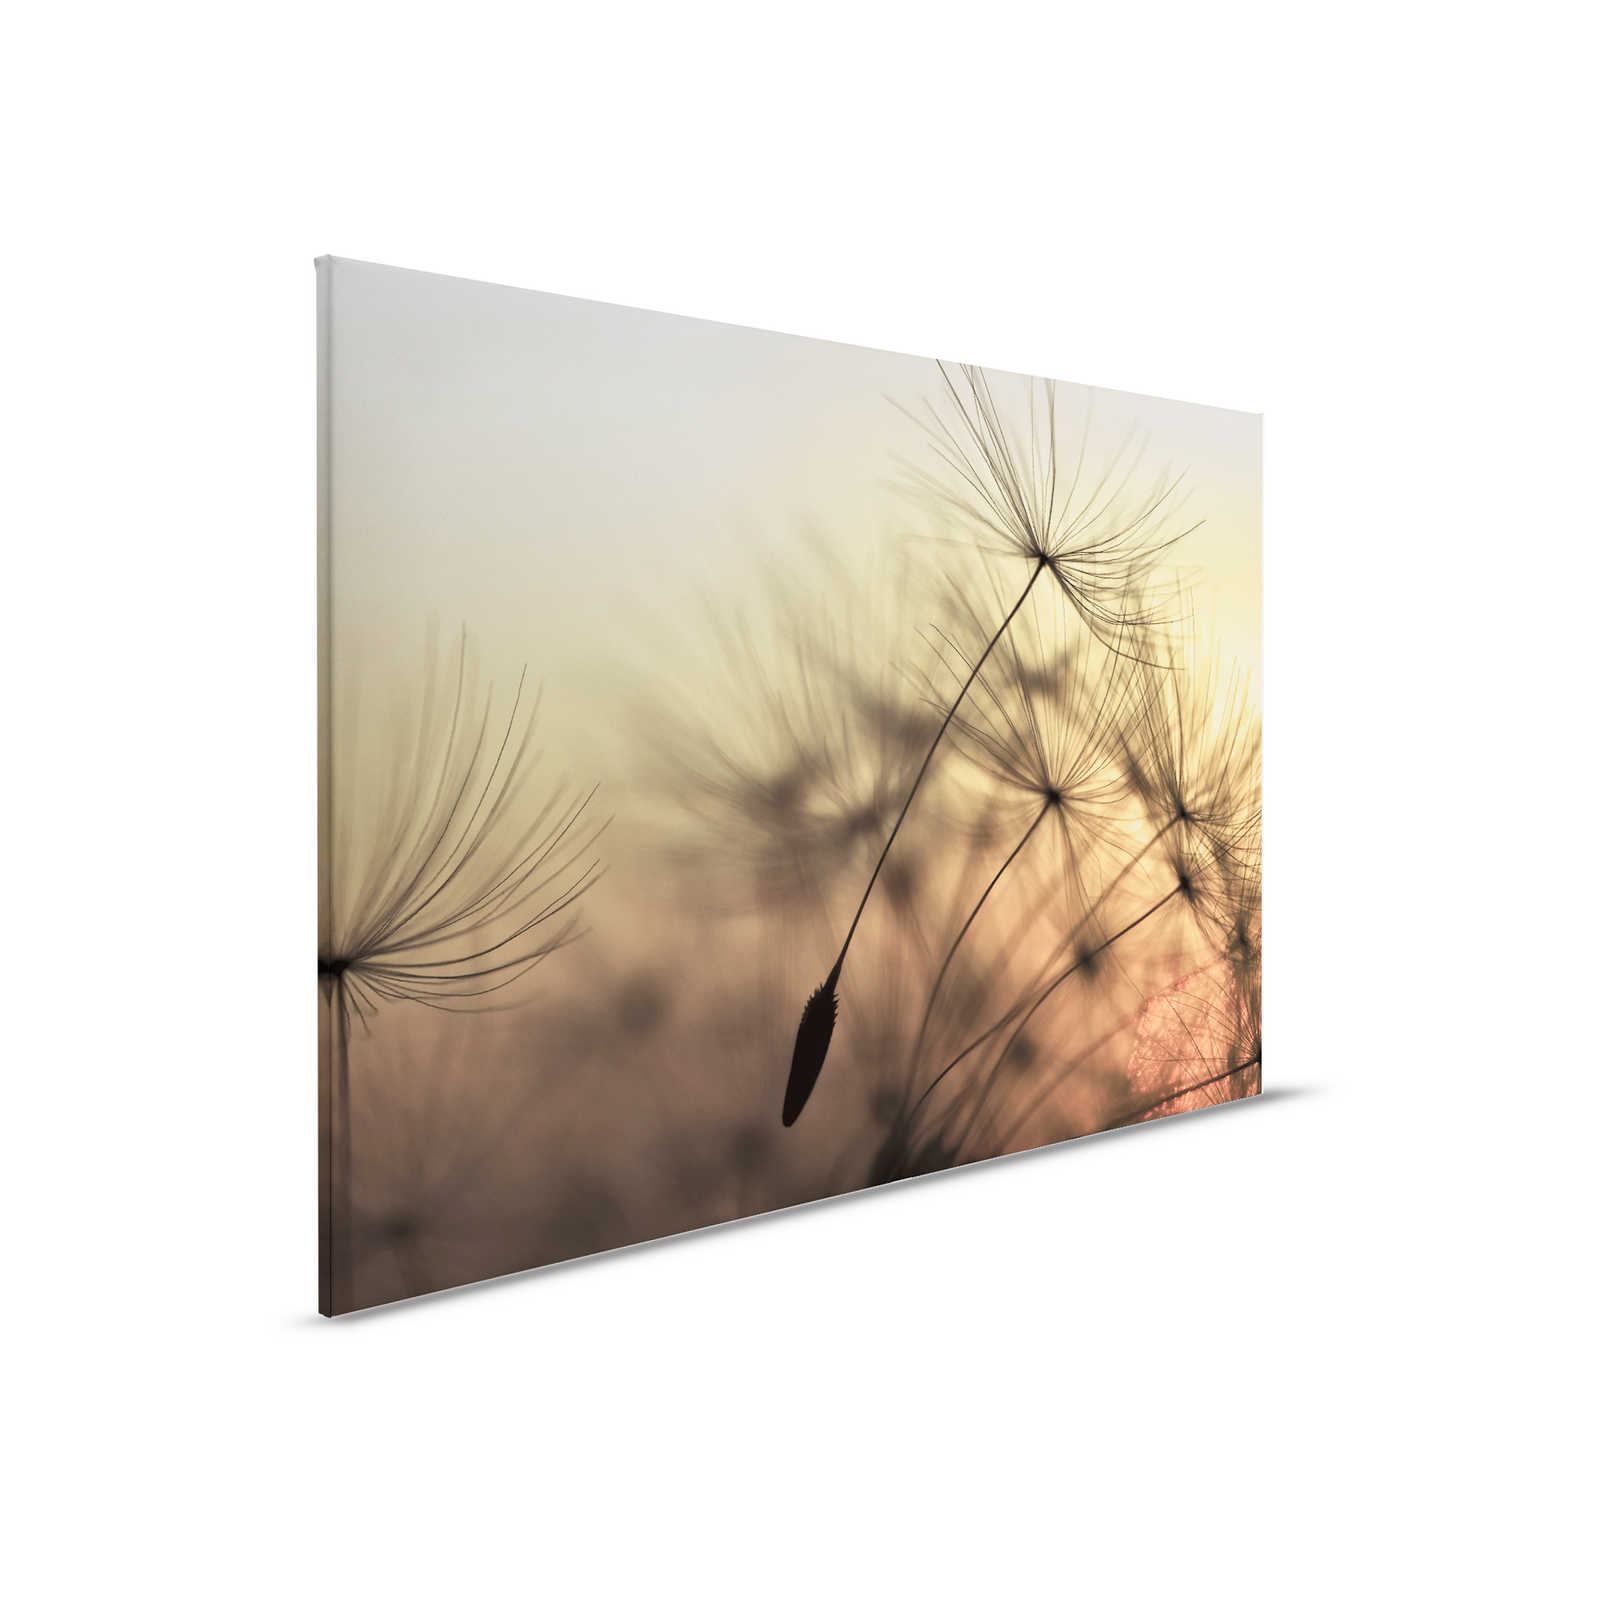         Canvas with flying dandelion in sunset - 0.90 m x 0.60 m
    